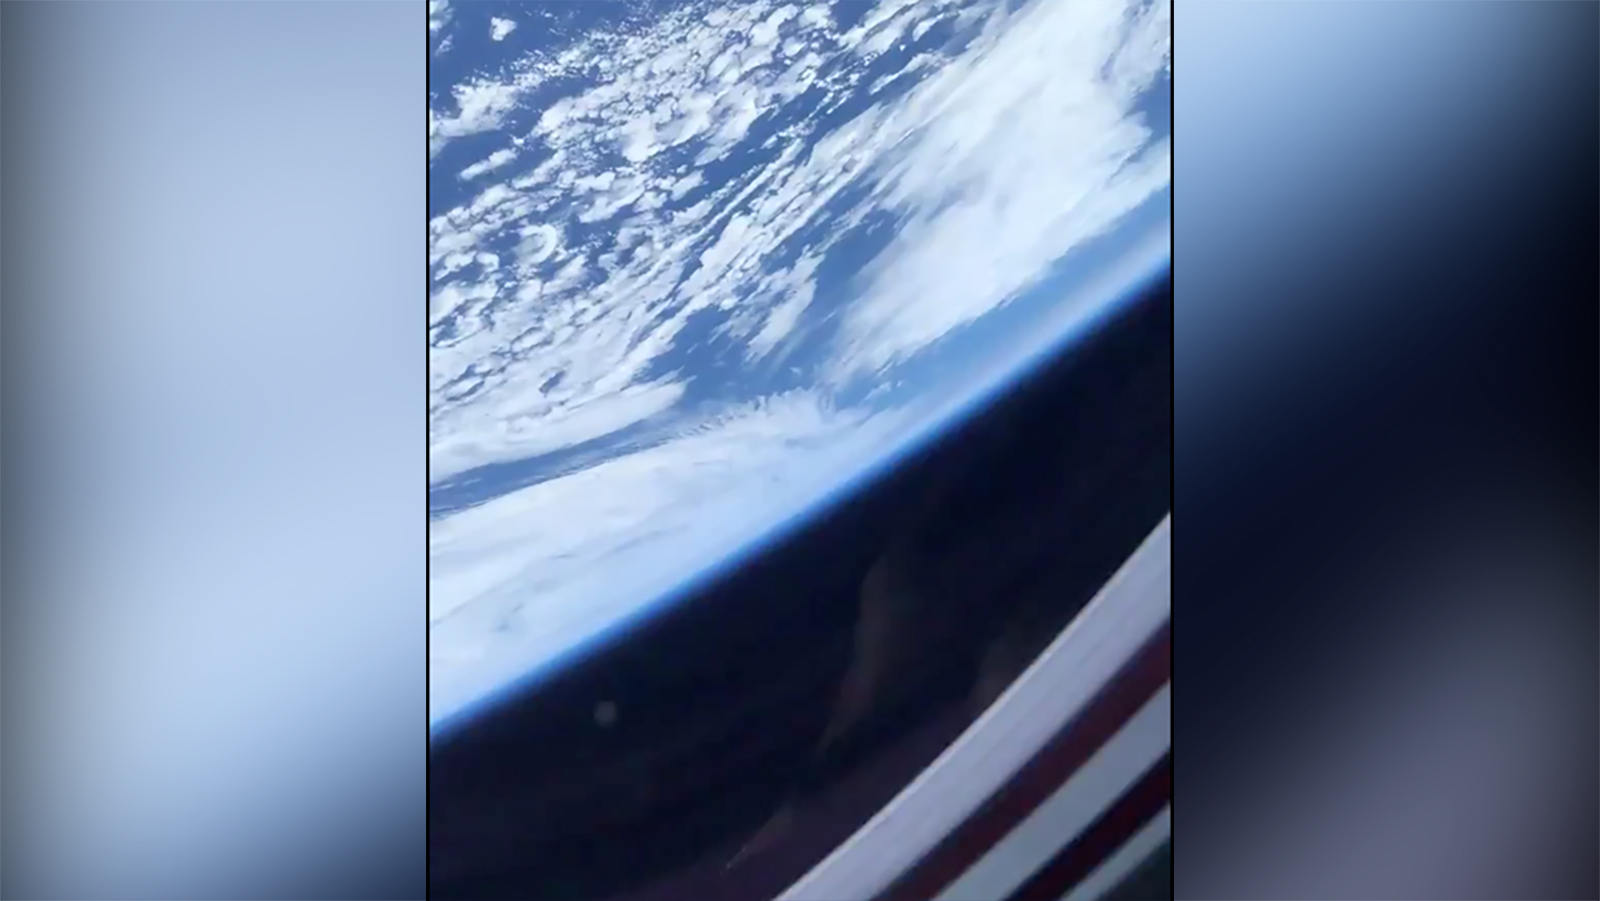 Watch NASA Astronaut Share Breathtaking View of Earth From SpaceX’s Crew Dragon